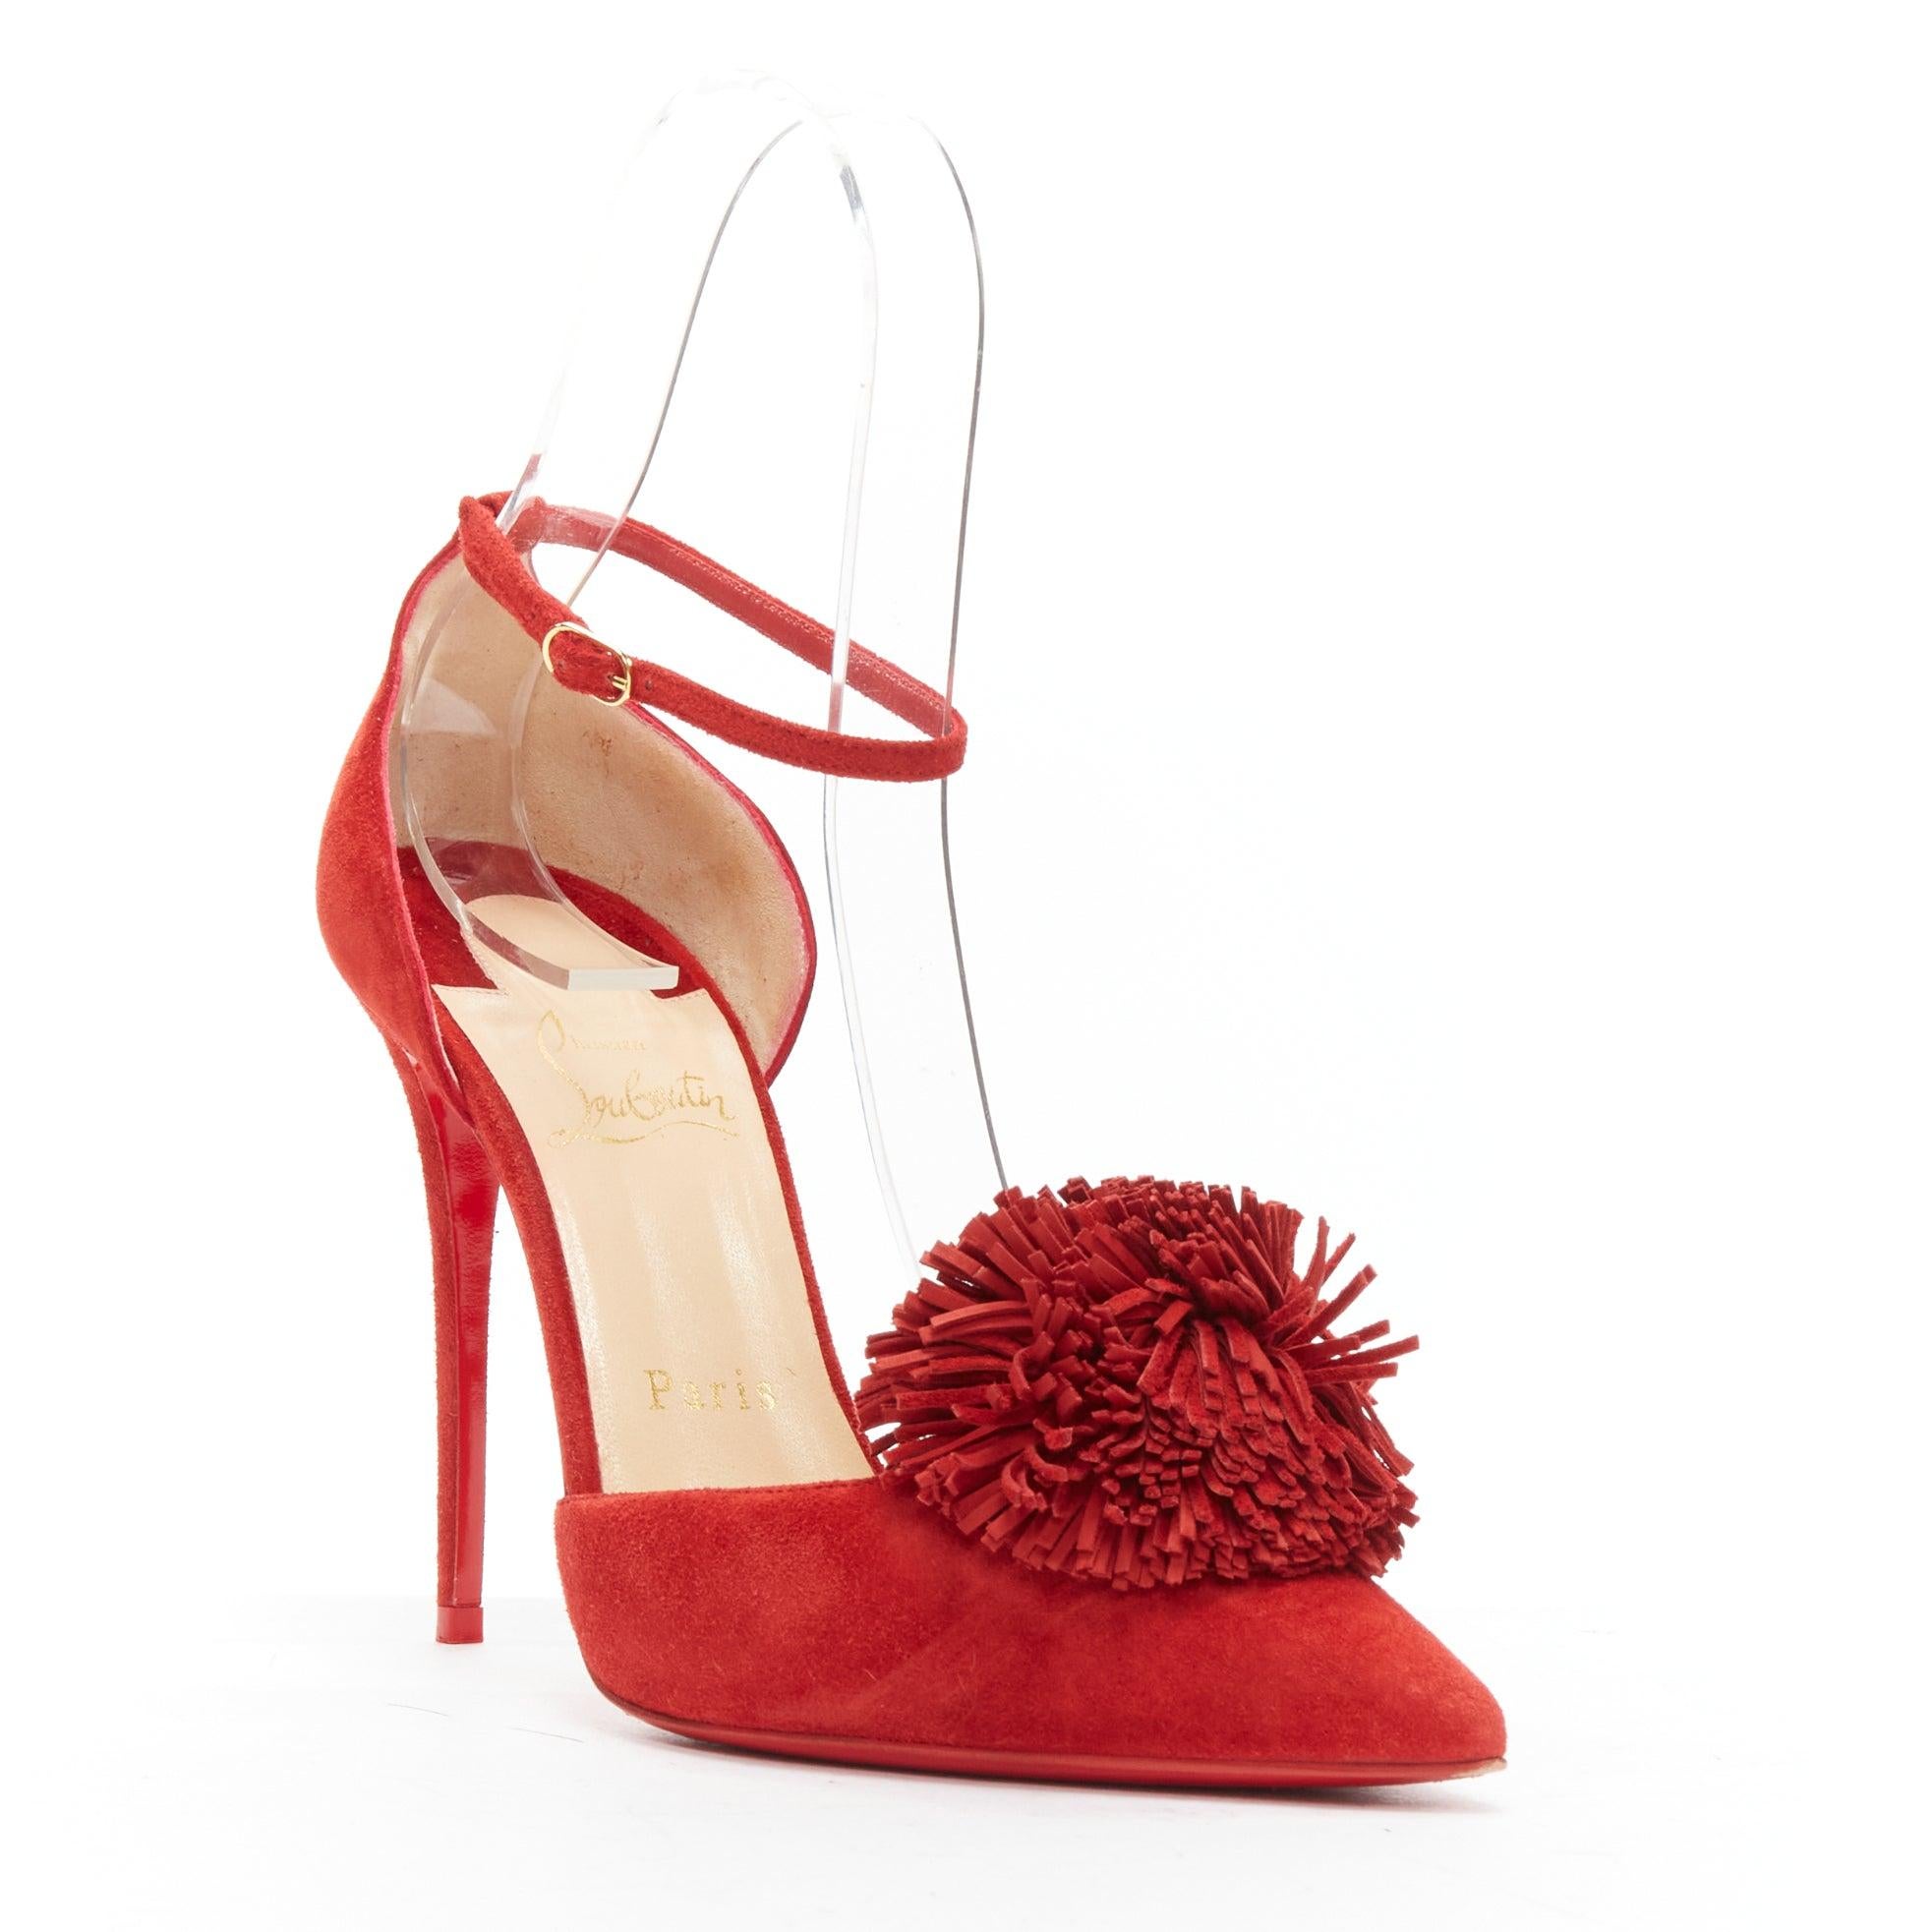 CHRISTIAN LOUBOUTIN Tsarou 100 red suede pom pom ankle strap dorsay heels EU37.5
Reference: TGAS/D00446
Brand: Christian Louboutin
Model: Tsarou 100
Material: Suede
Color: Red
Pattern: Solid
Closure: Ankle Strap
Lining: Nude Leather
Made in: